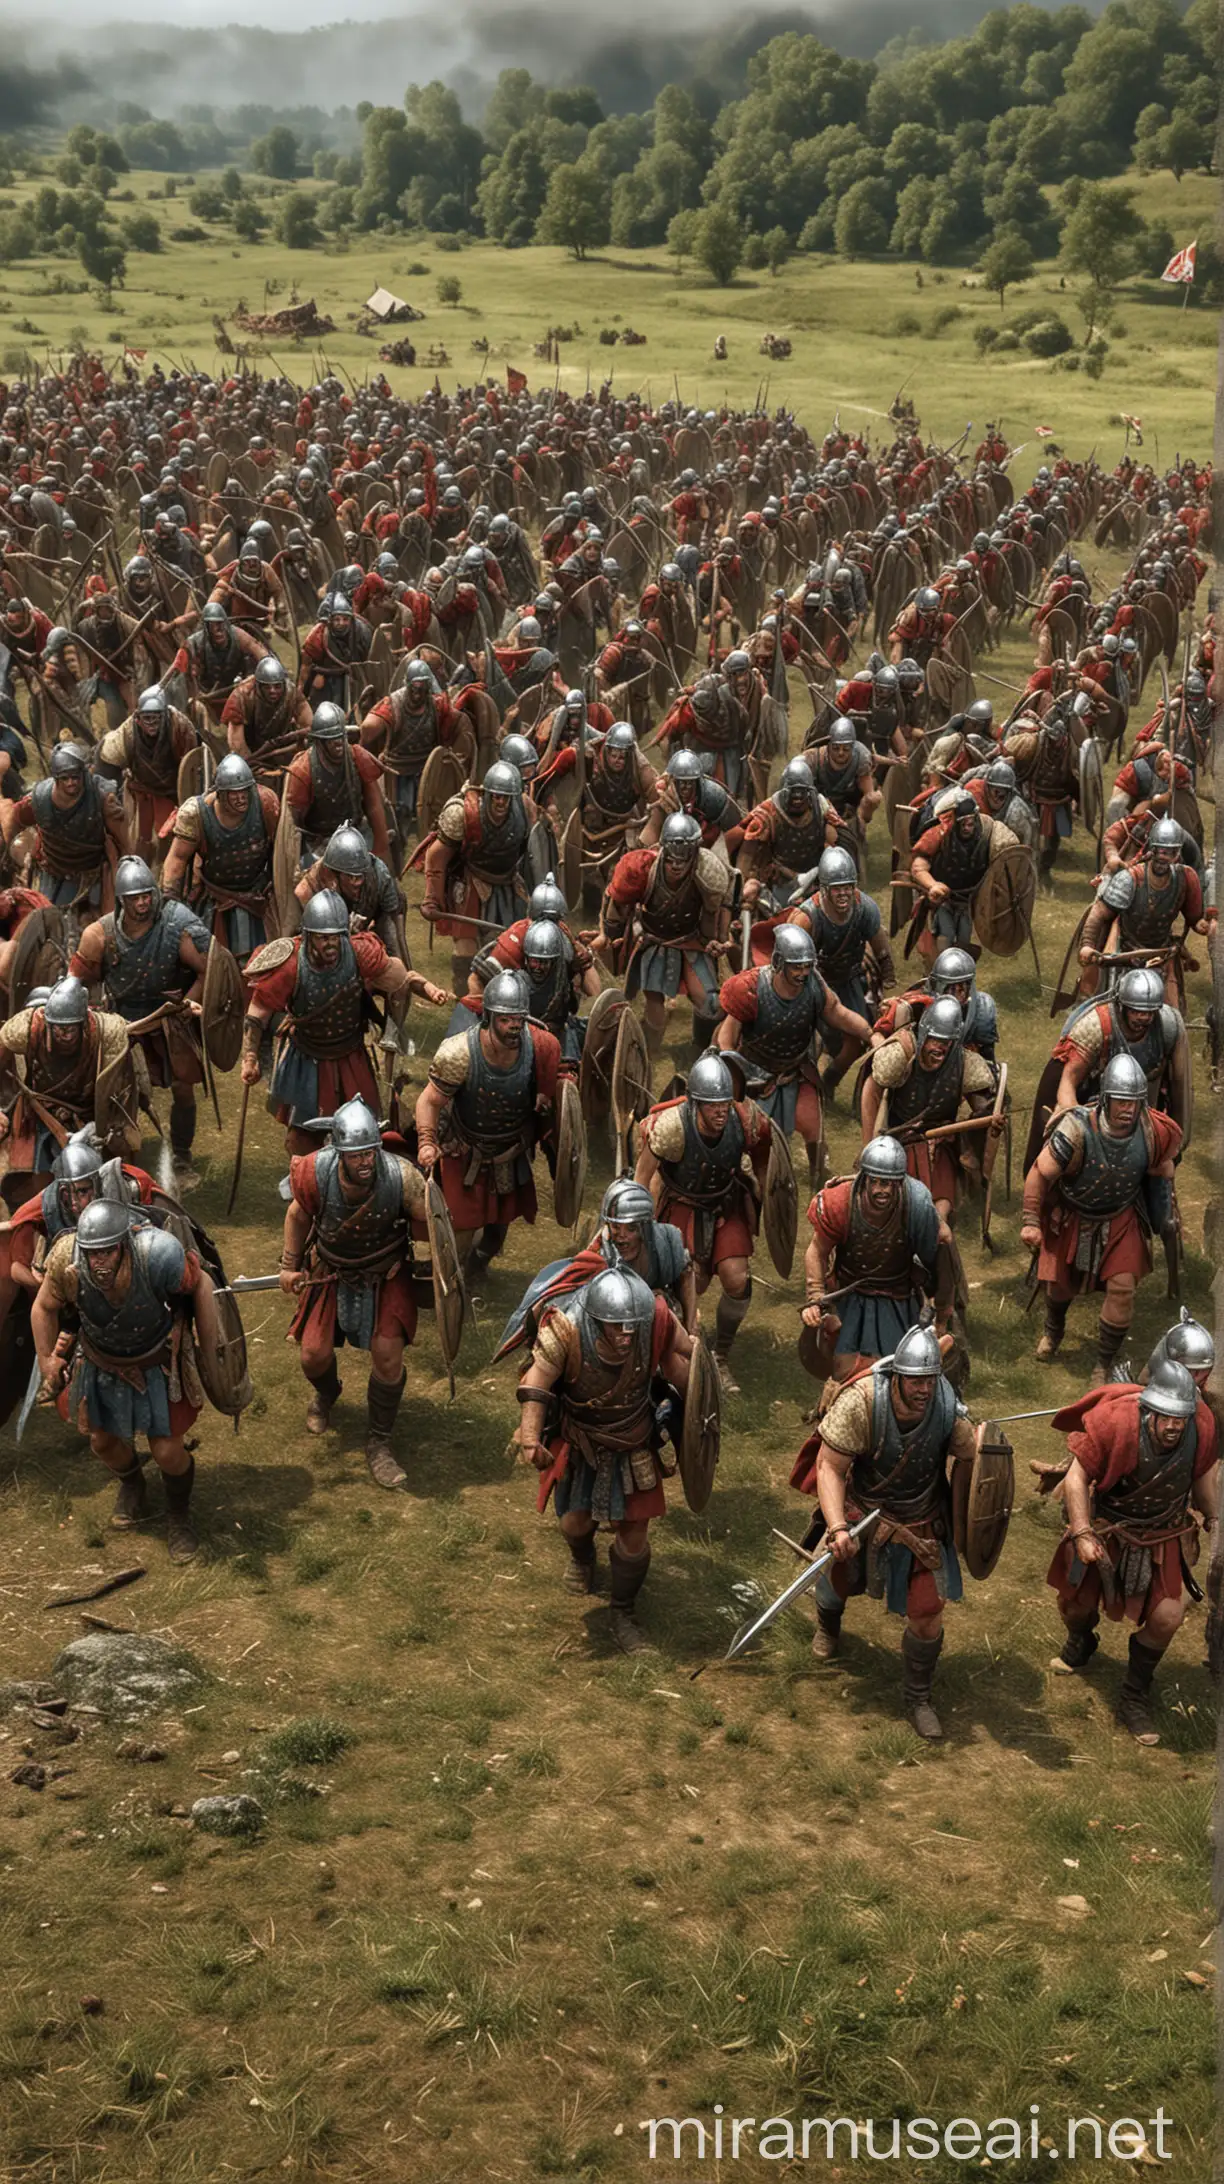 "...and defeated both the trapped Gallic army and reinforcements." hyper realistic